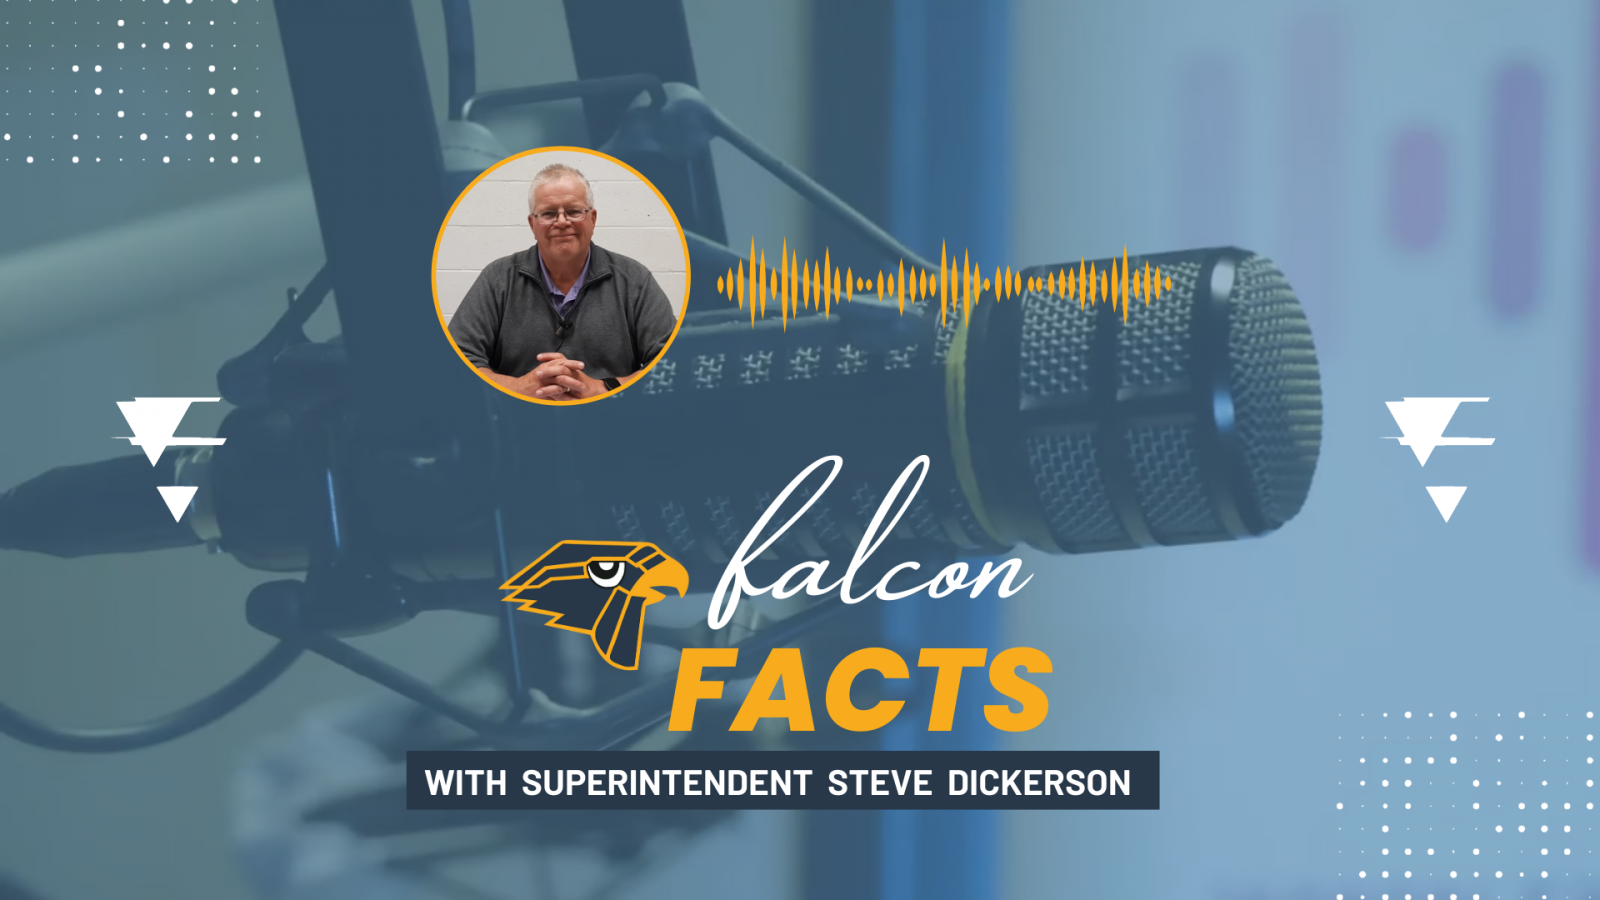 An image of the title card from the series of videos below. Text: "Falcon Facts with Superintendent Steve Dickerson."